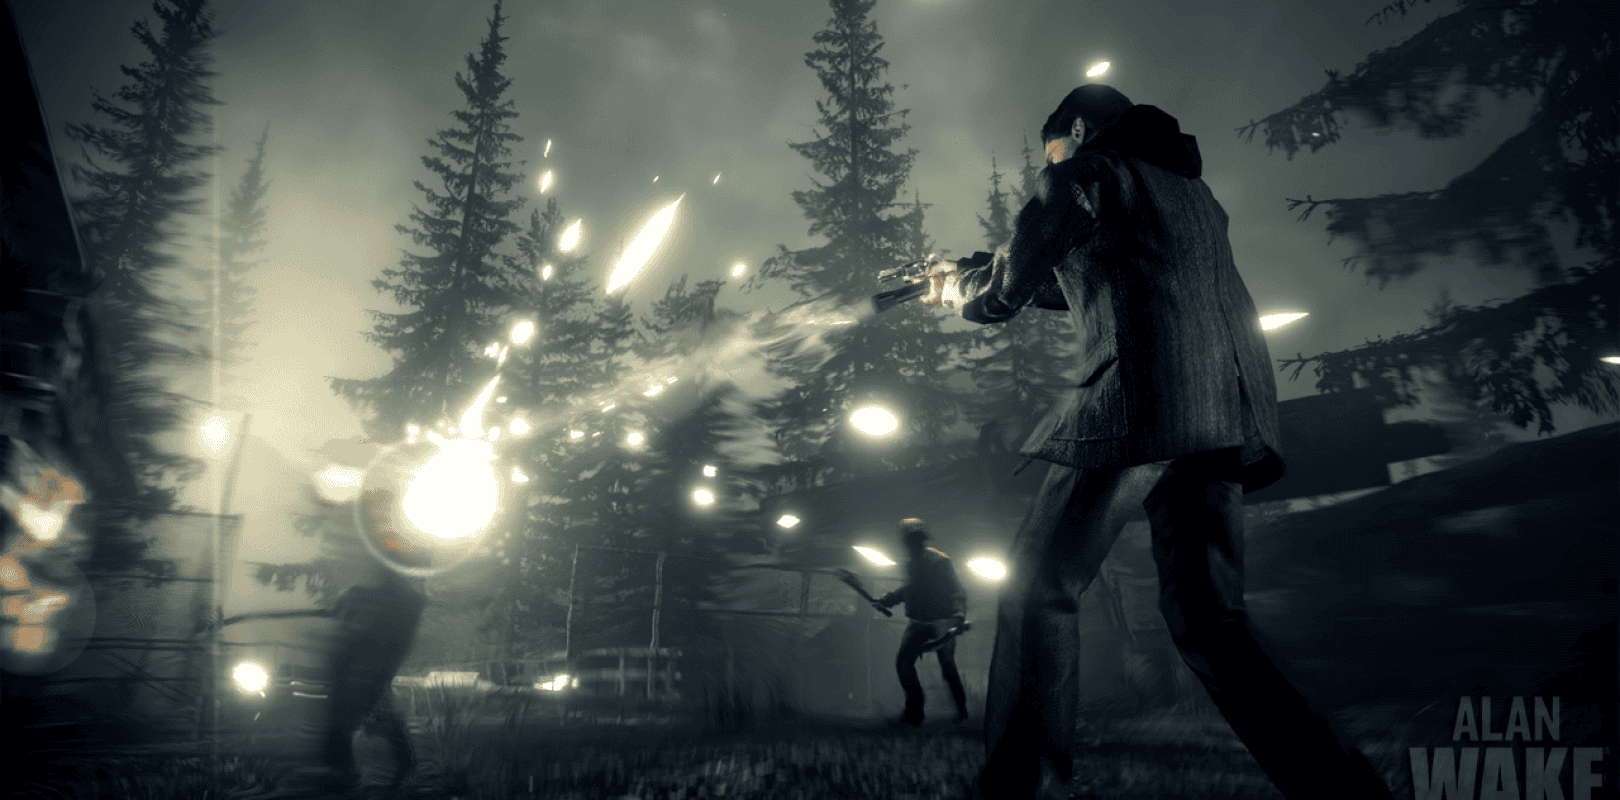 Alan Wake instal the new for ios